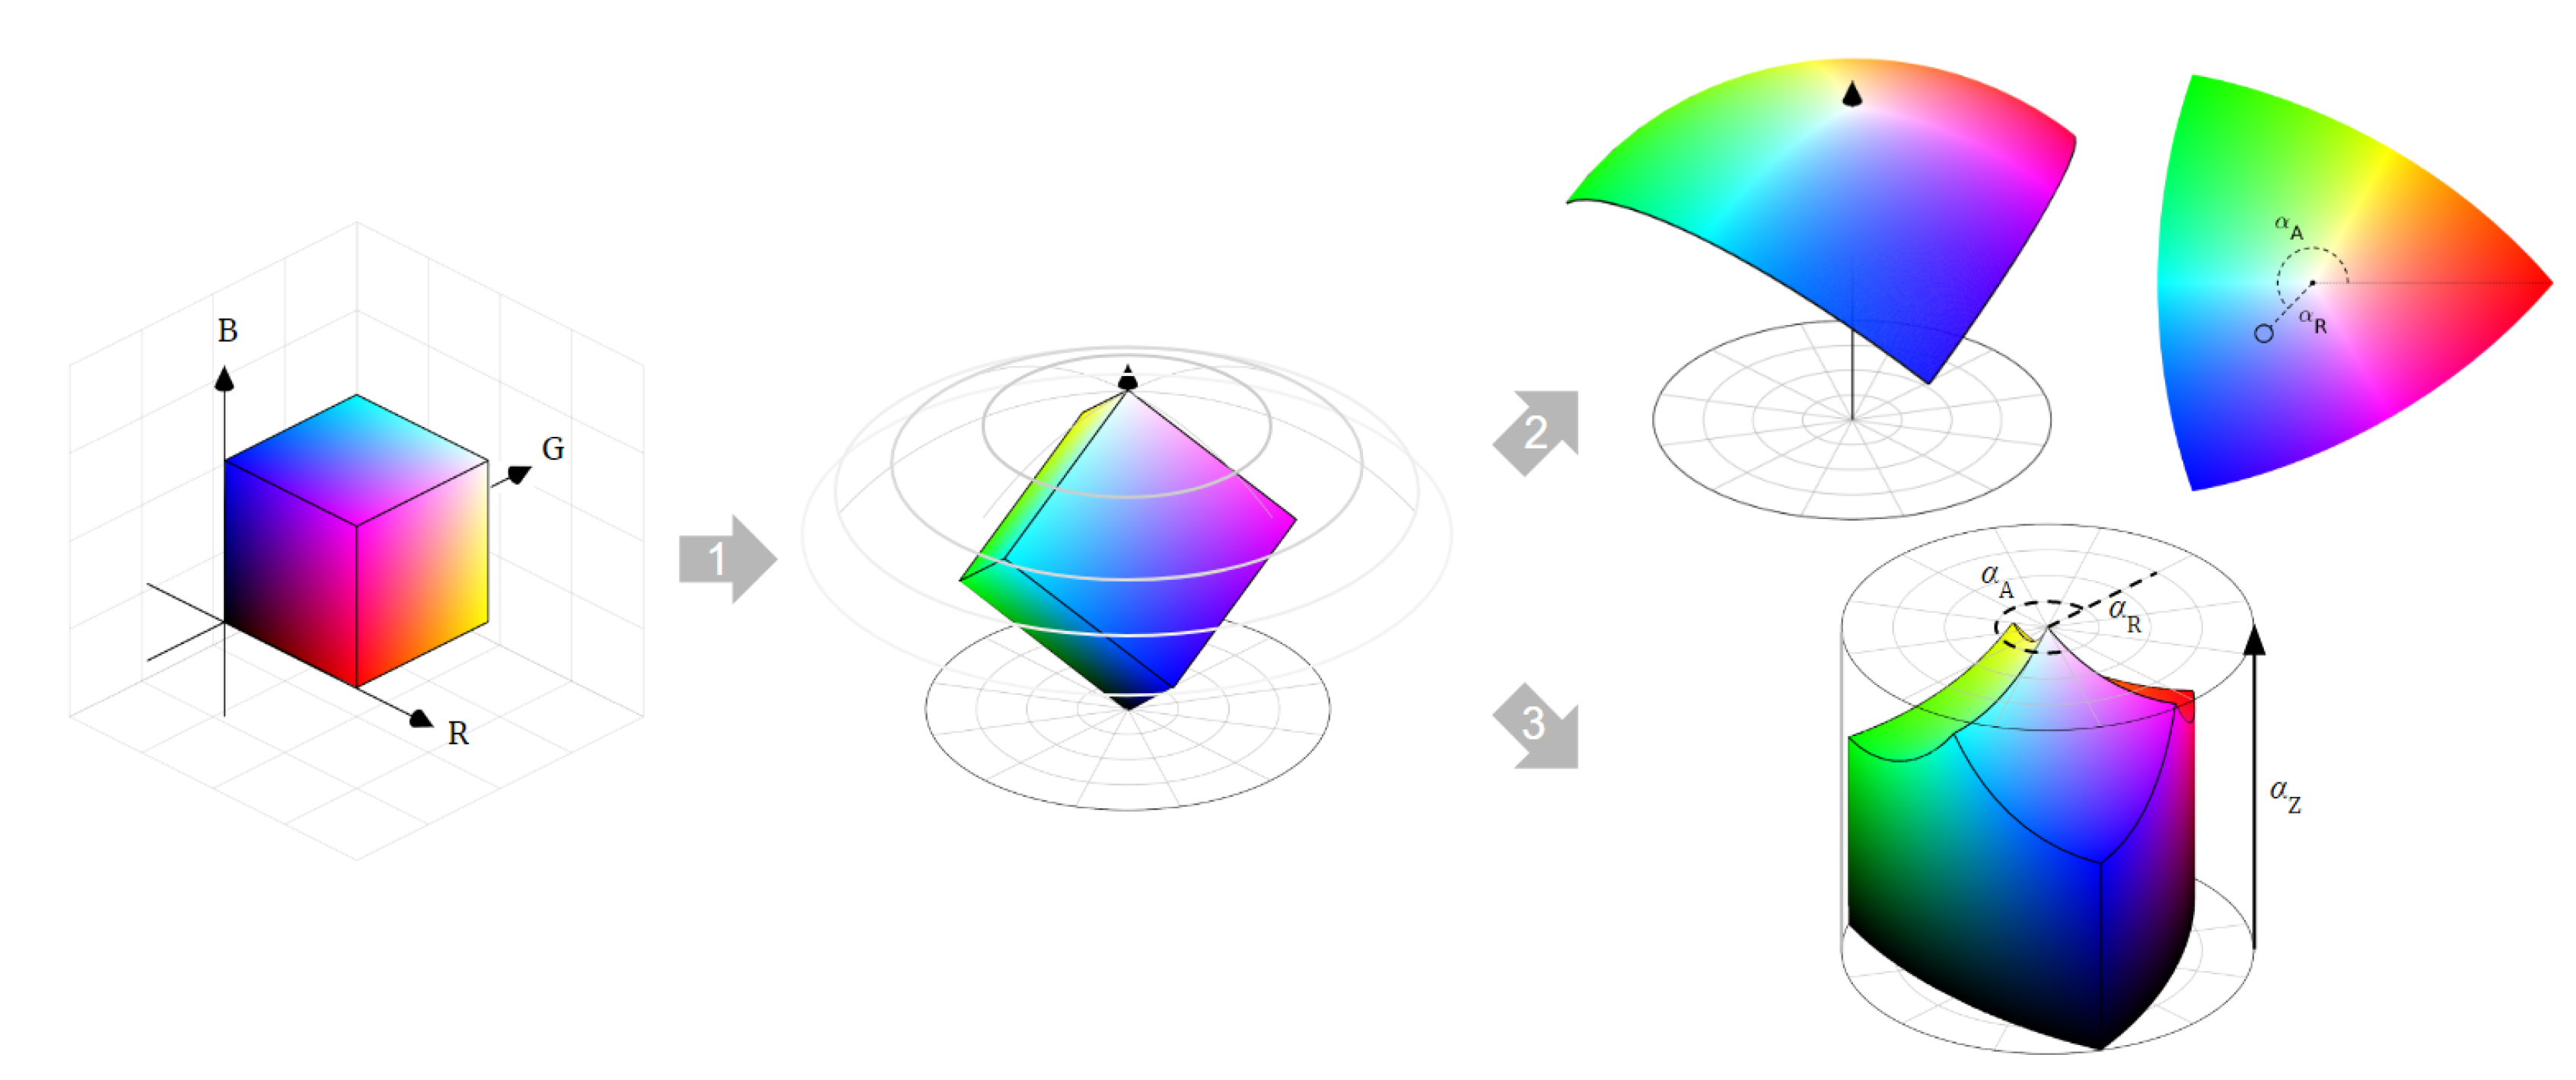 File:HSV Color wheel mapping inverted.png - Wikimedia Commons